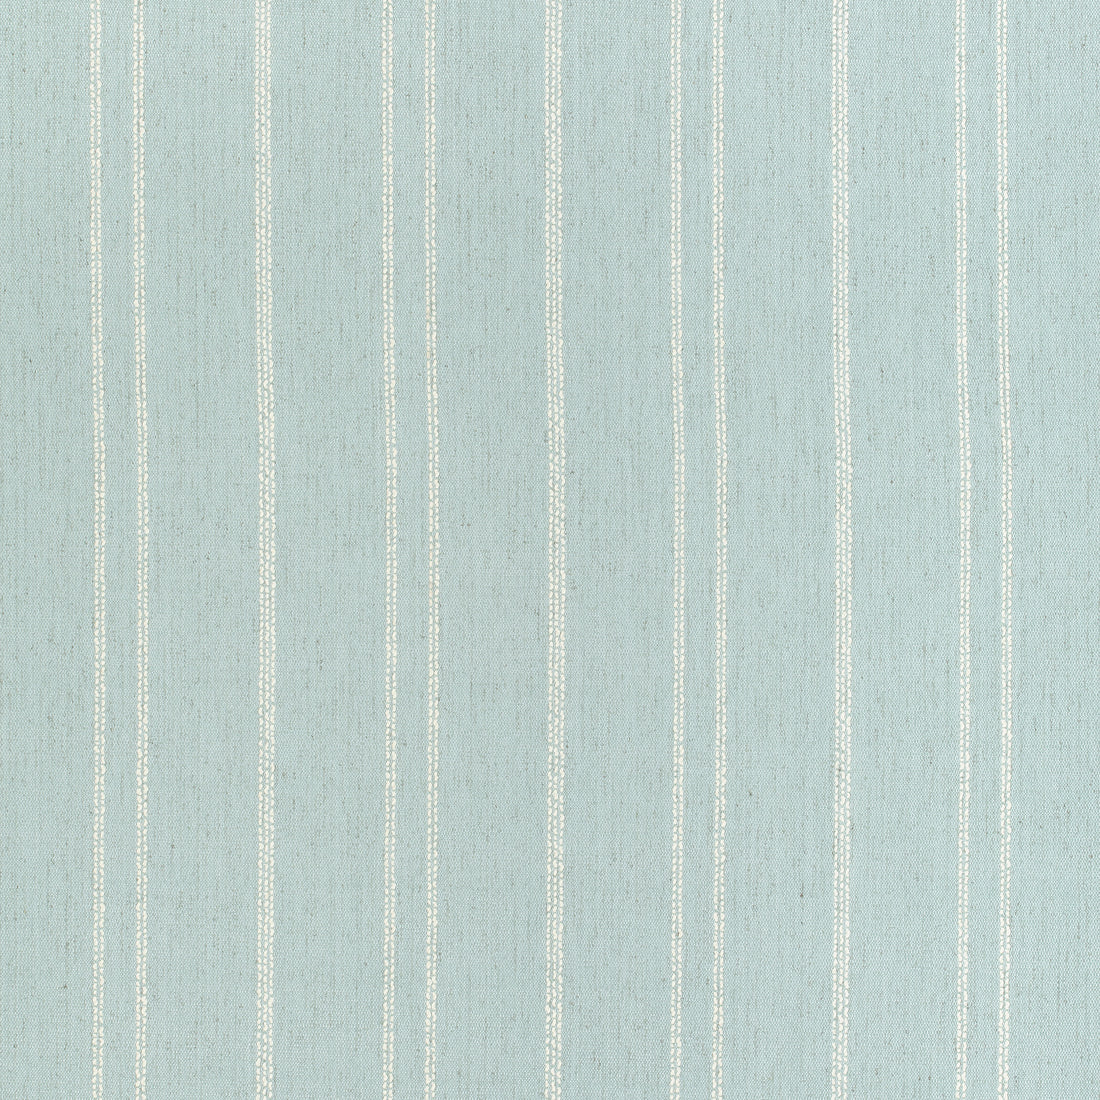 Nolan Stripe fabric in seamist color - pattern number W73310 - by Thibaut in the Nomad collection